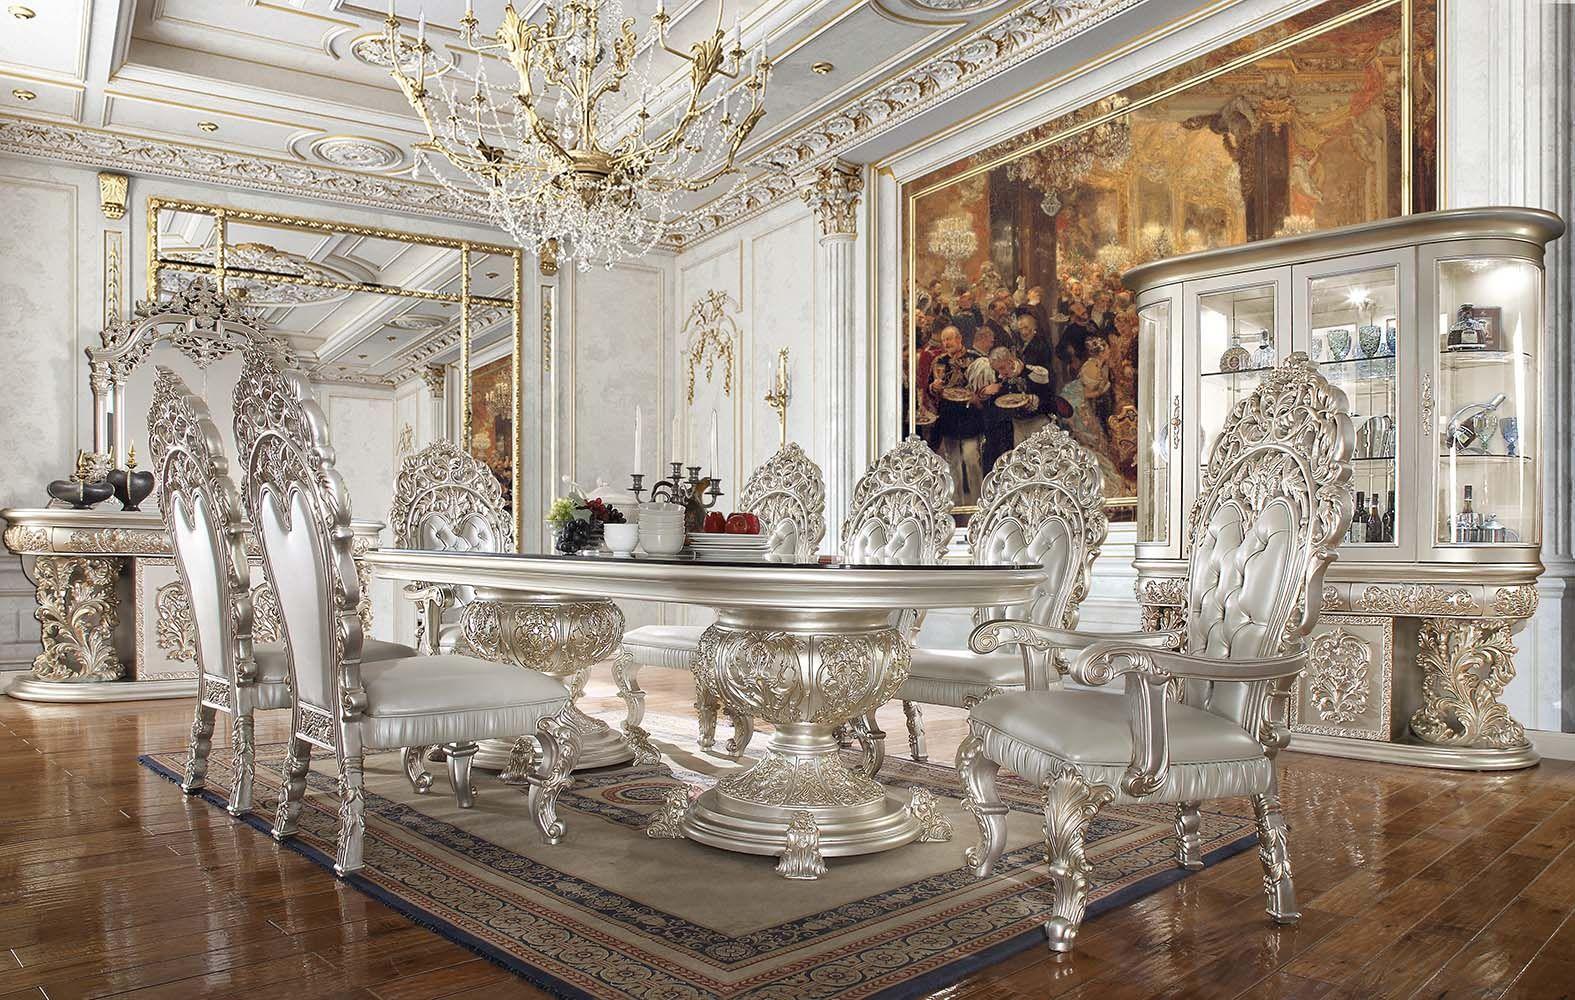 Classic Dining Room Set Sandoval Dining Room Set 10PCS DN01494-S-10PCS DN01494-S-10PCS in Silver PU